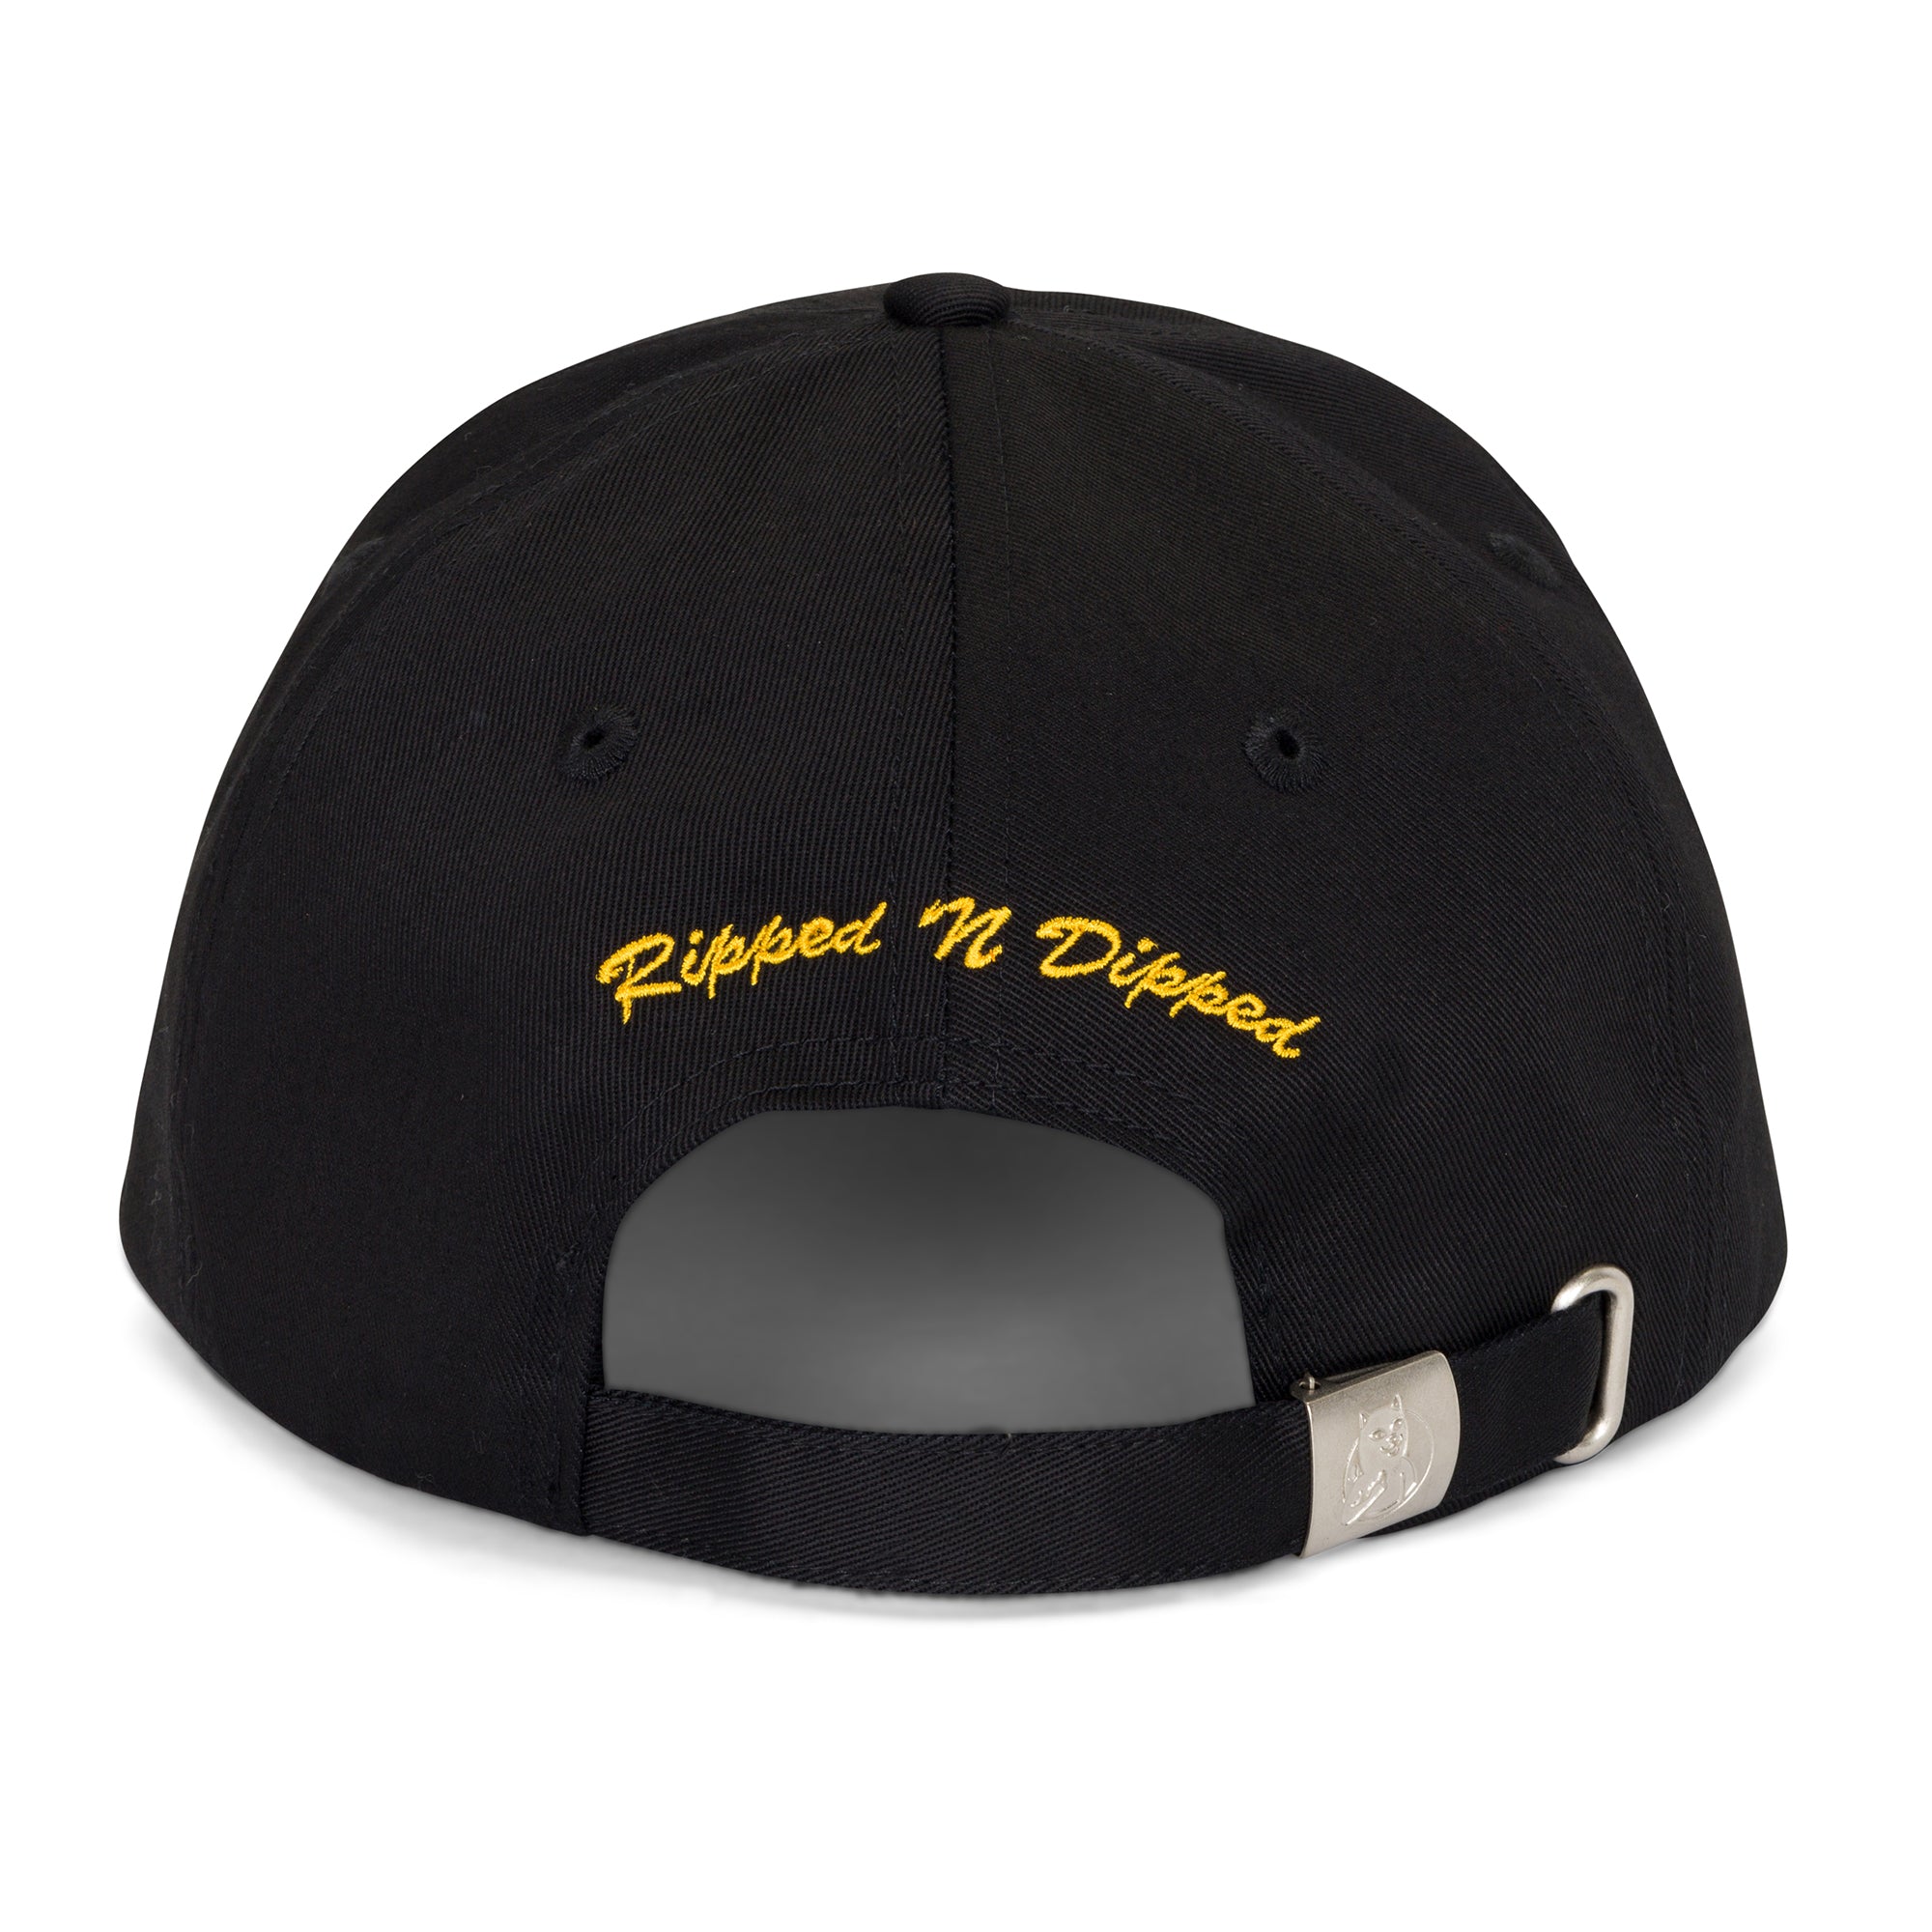 Ripped N Dipped 6 Panel (Black)